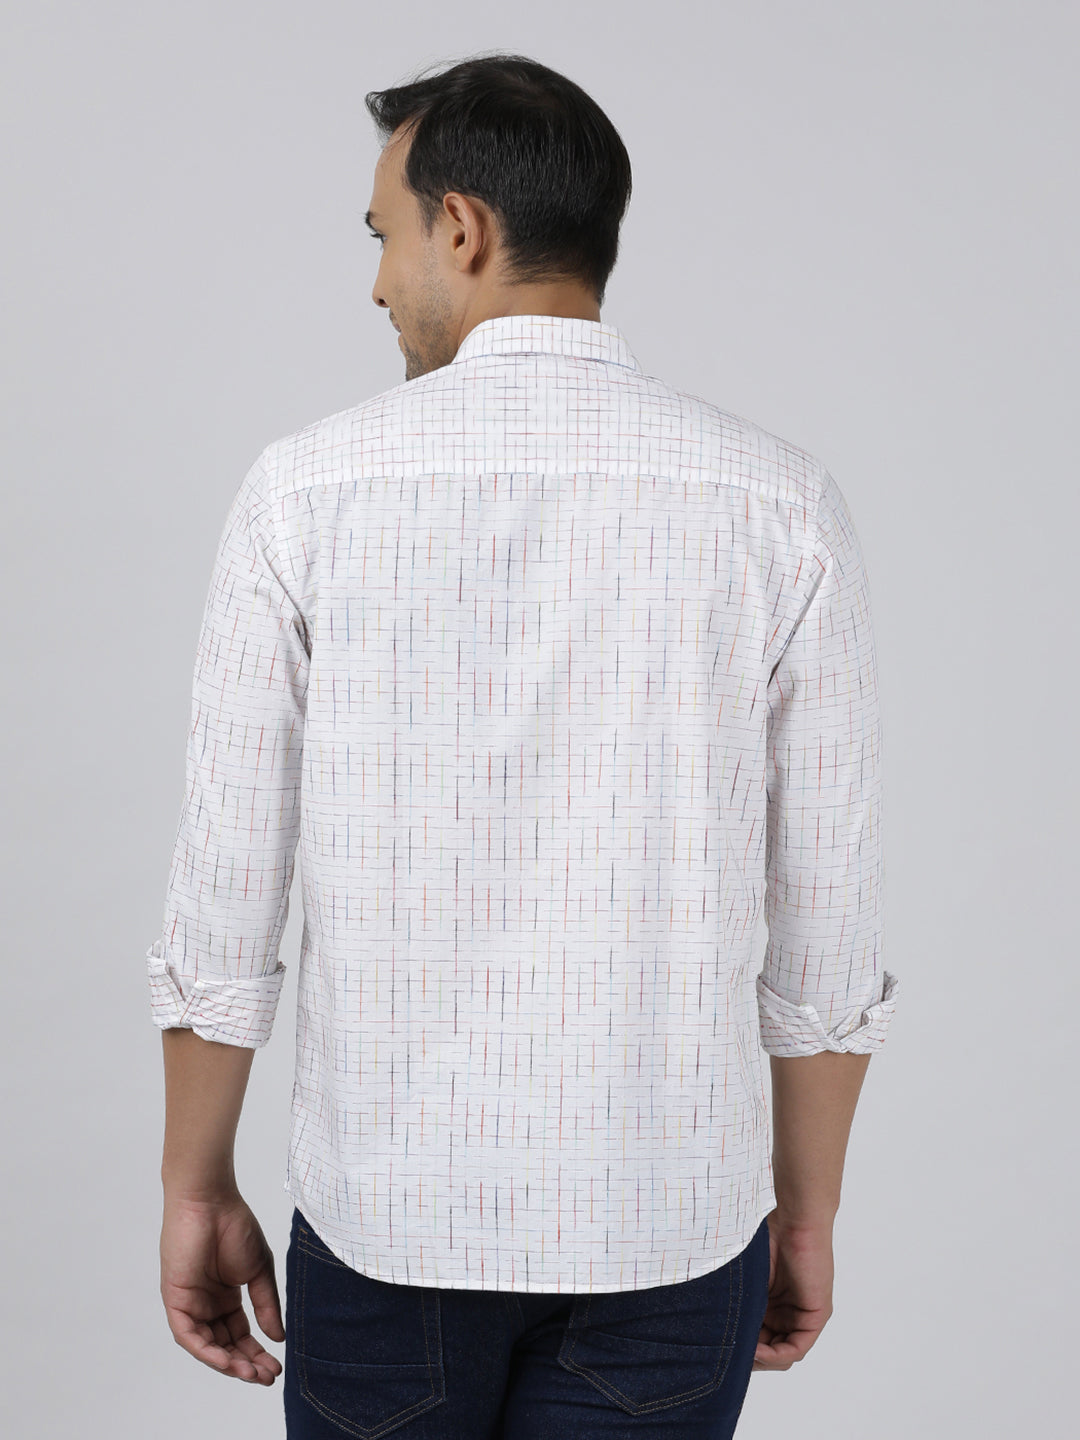 Casual White Full Sleeve Regular Fit Print Shirt with Collar for Men